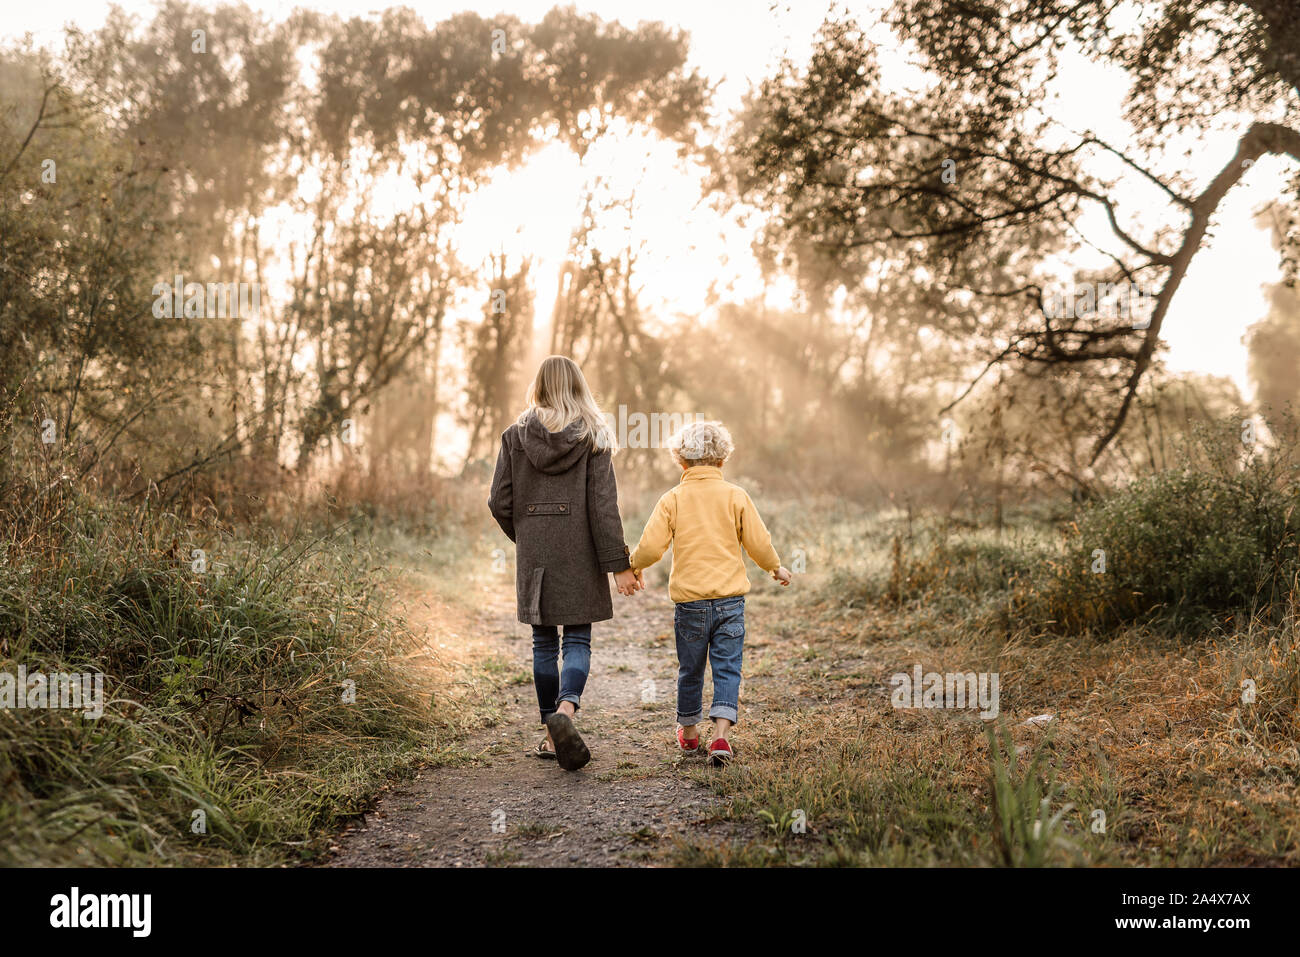 Preteen sister and preschool brother walking in forest with fog Stock Photo